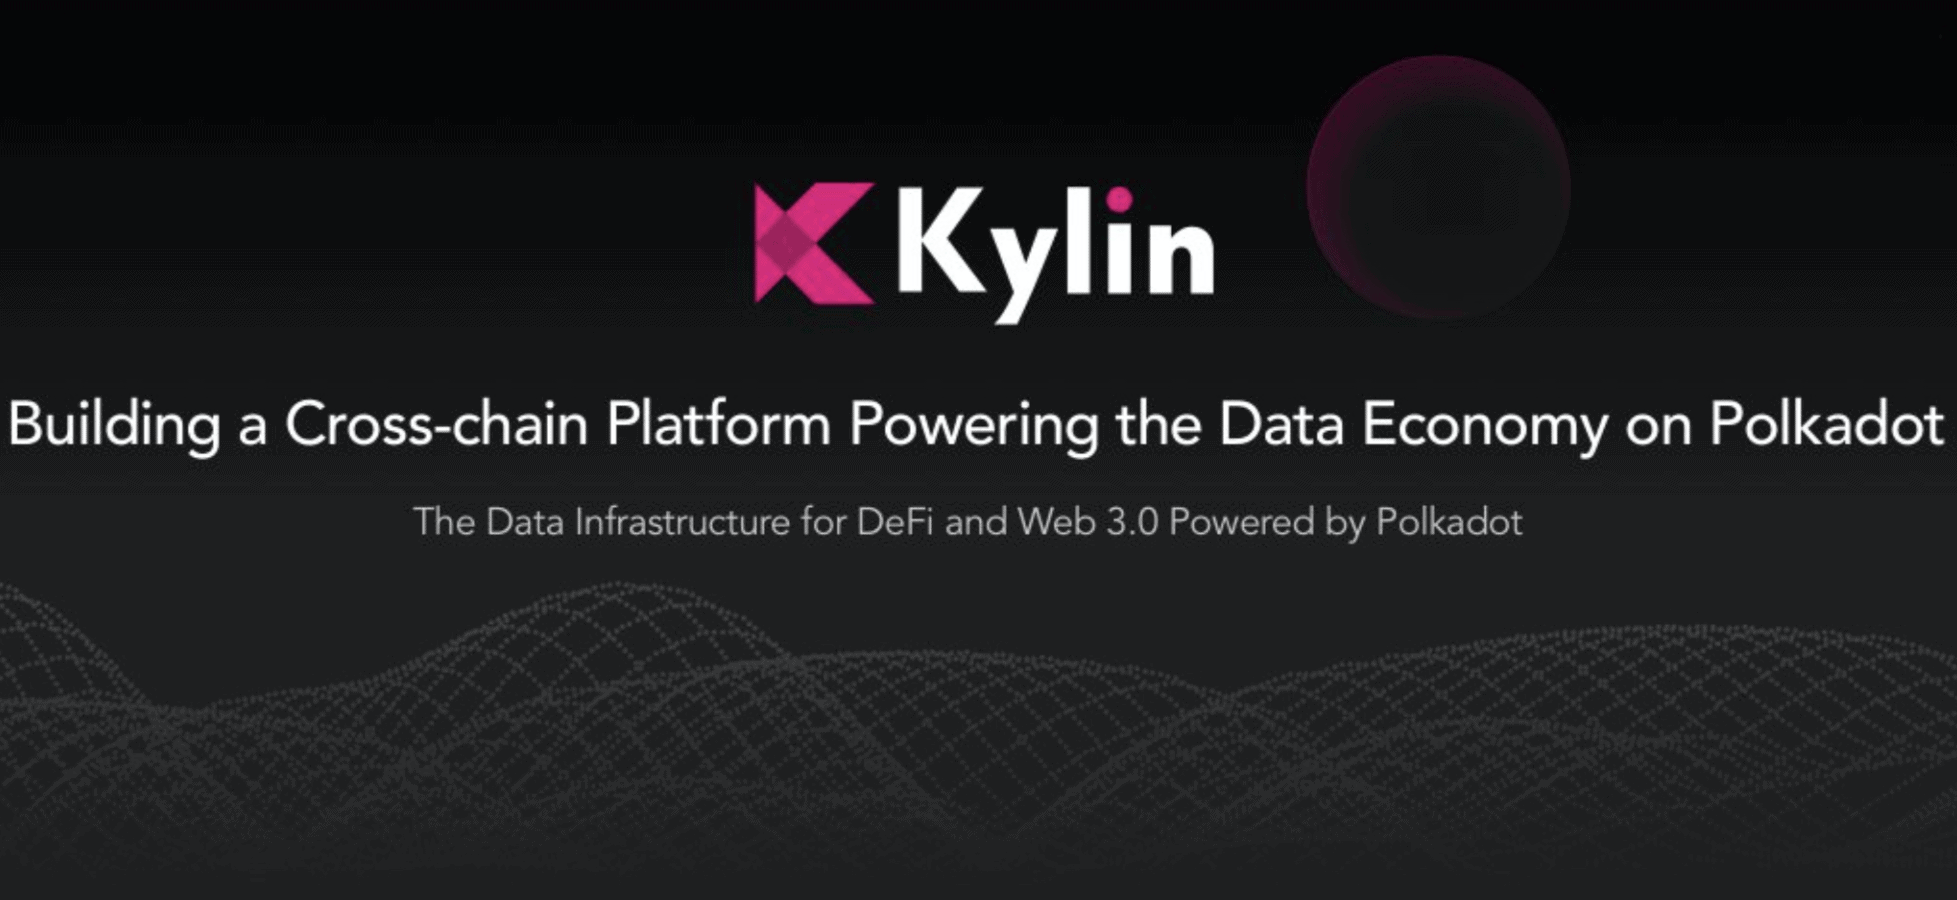 Kylin Network (KYL) - All information about Kylin Network